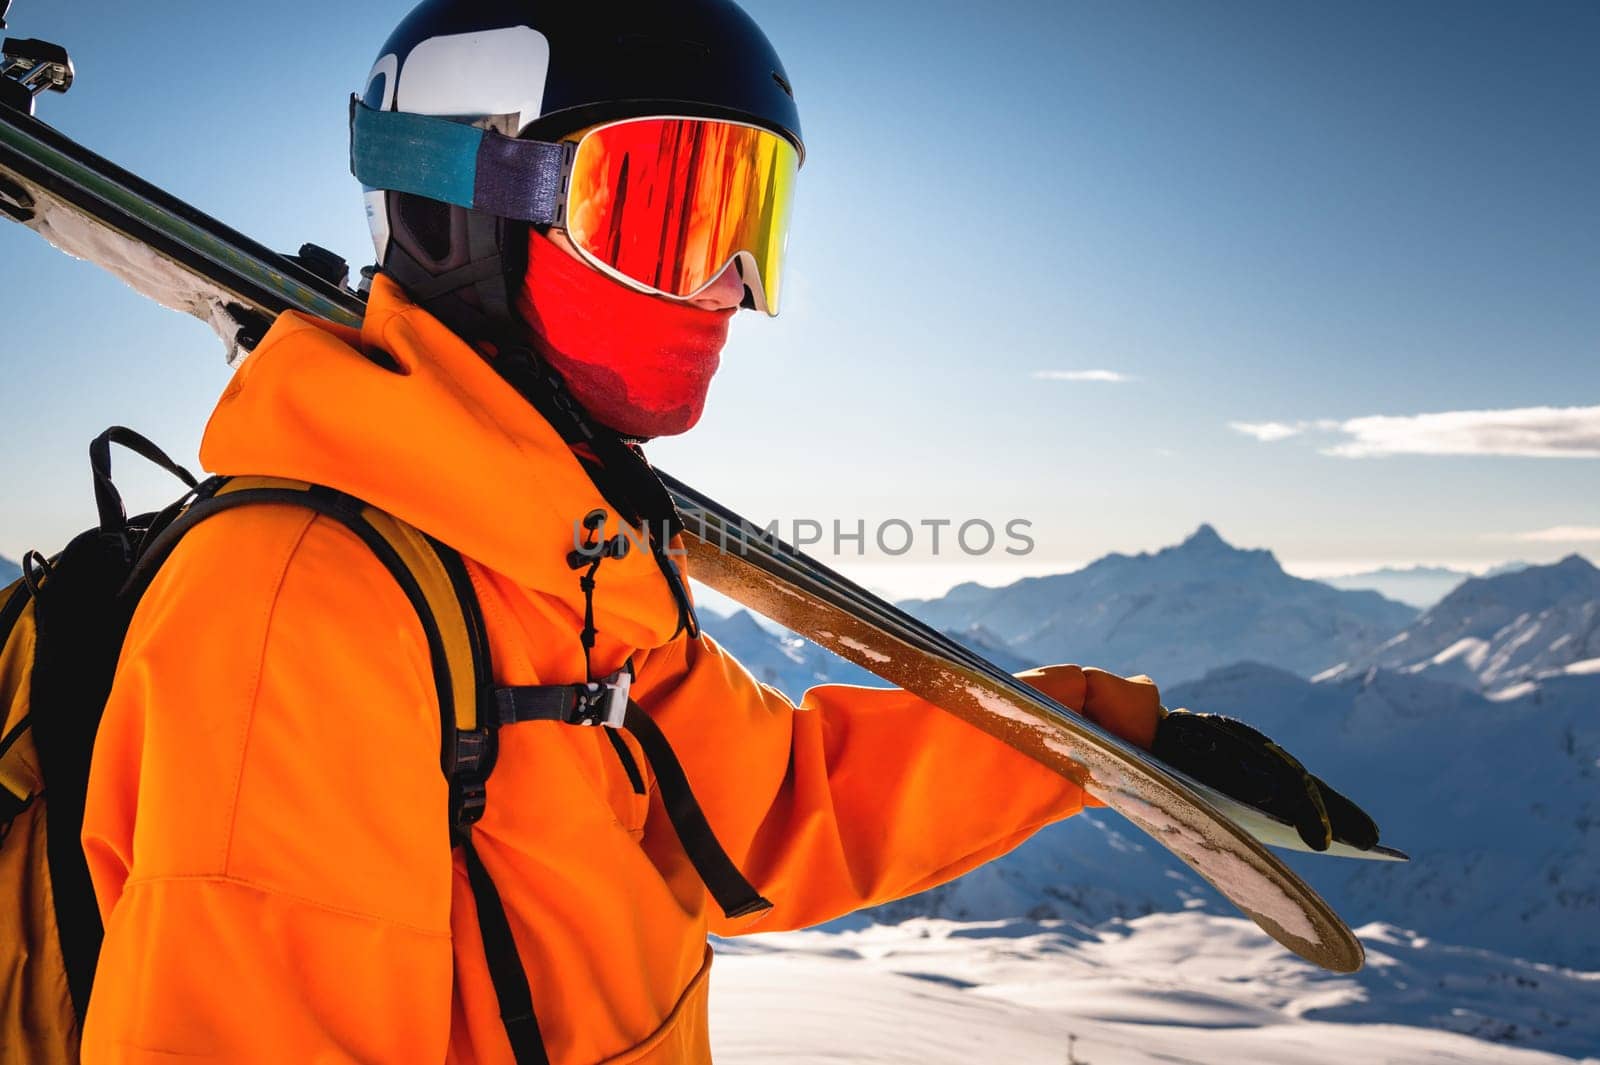 shot of a skier standing on top of a mountain with skis on his shoulder on a sunny winter day, sunlight, outdoor recreation, skiing, lifestyle, downhill sport concept.